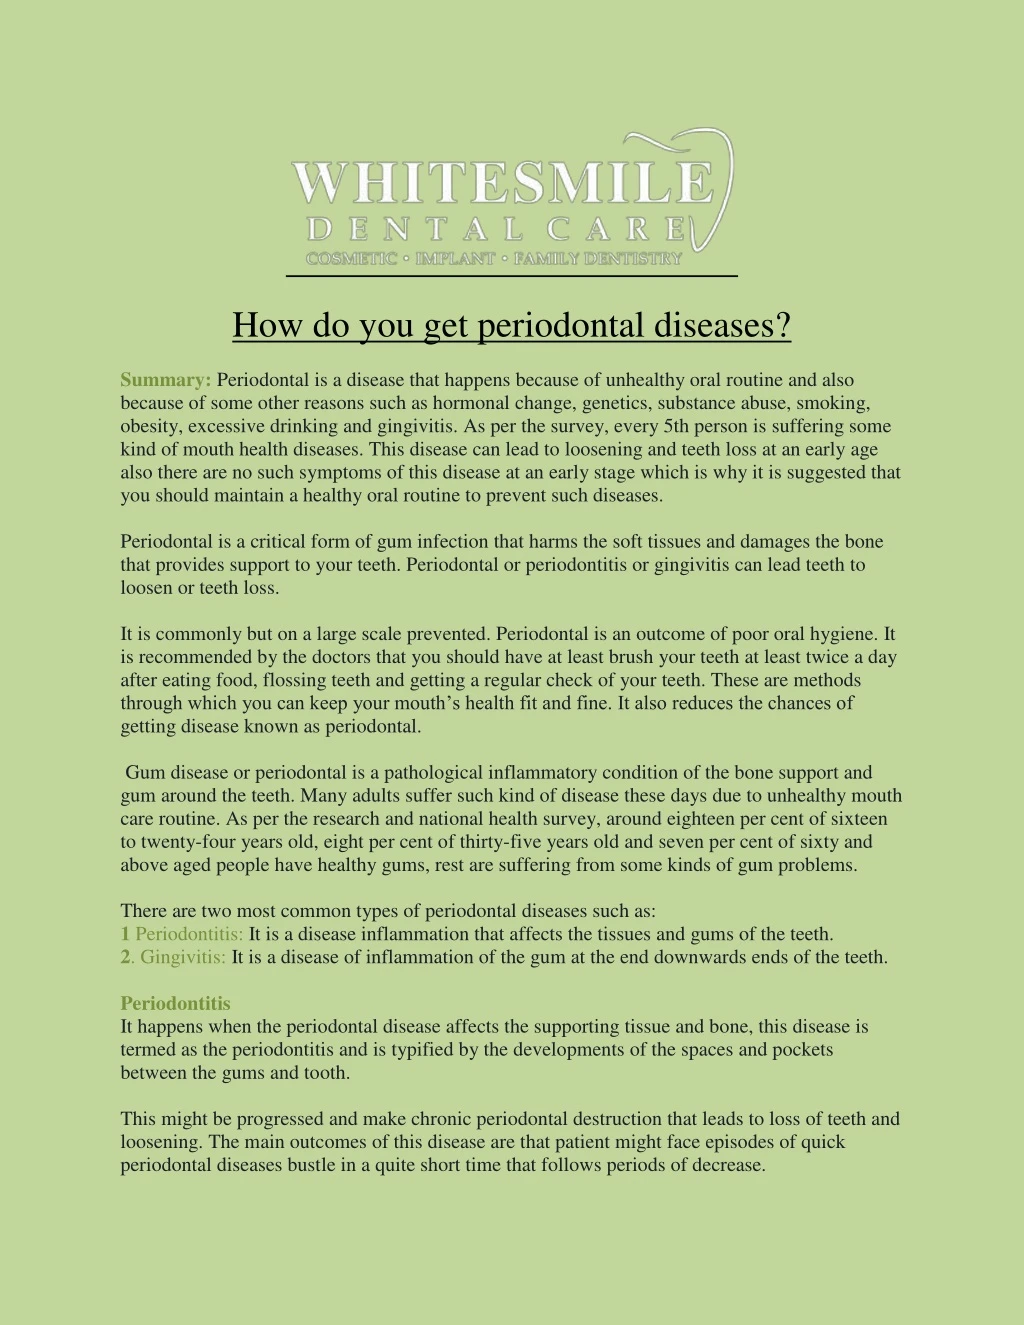 how do you get periodontal diseases